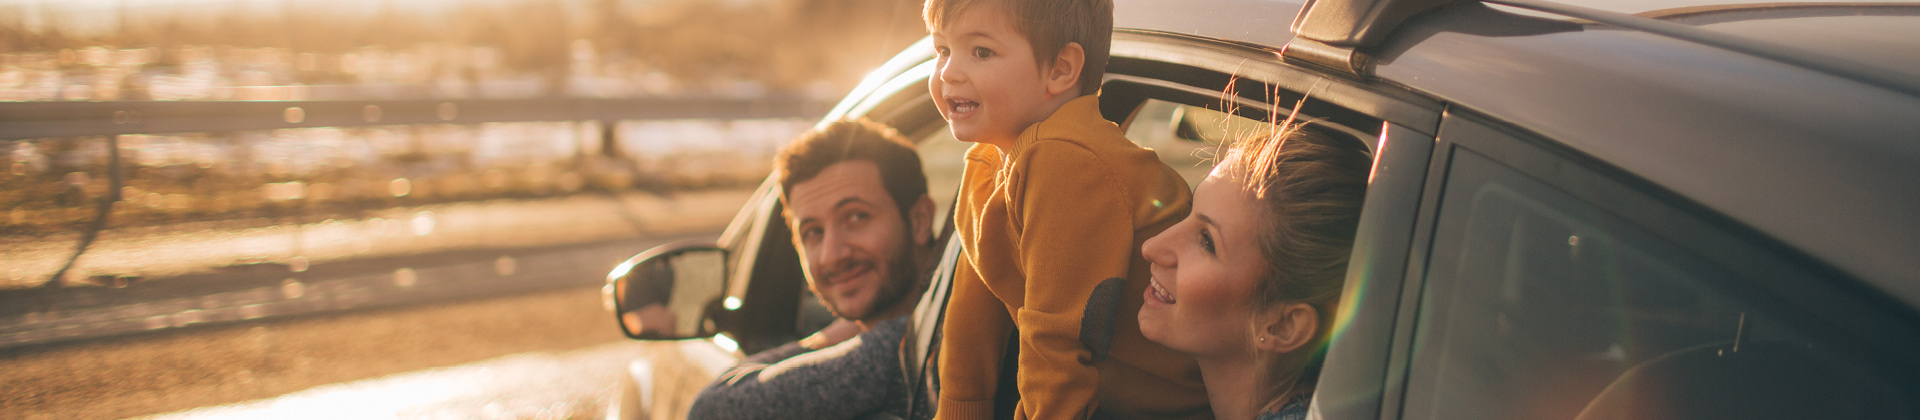 a family with the man in drivers seat with woman and preschool aged boy on her lap - all leaning out of the window - the father looks at the boy smiling, the mother and boy are looking at something in the distance, smiling. The sun is glowing on them. 